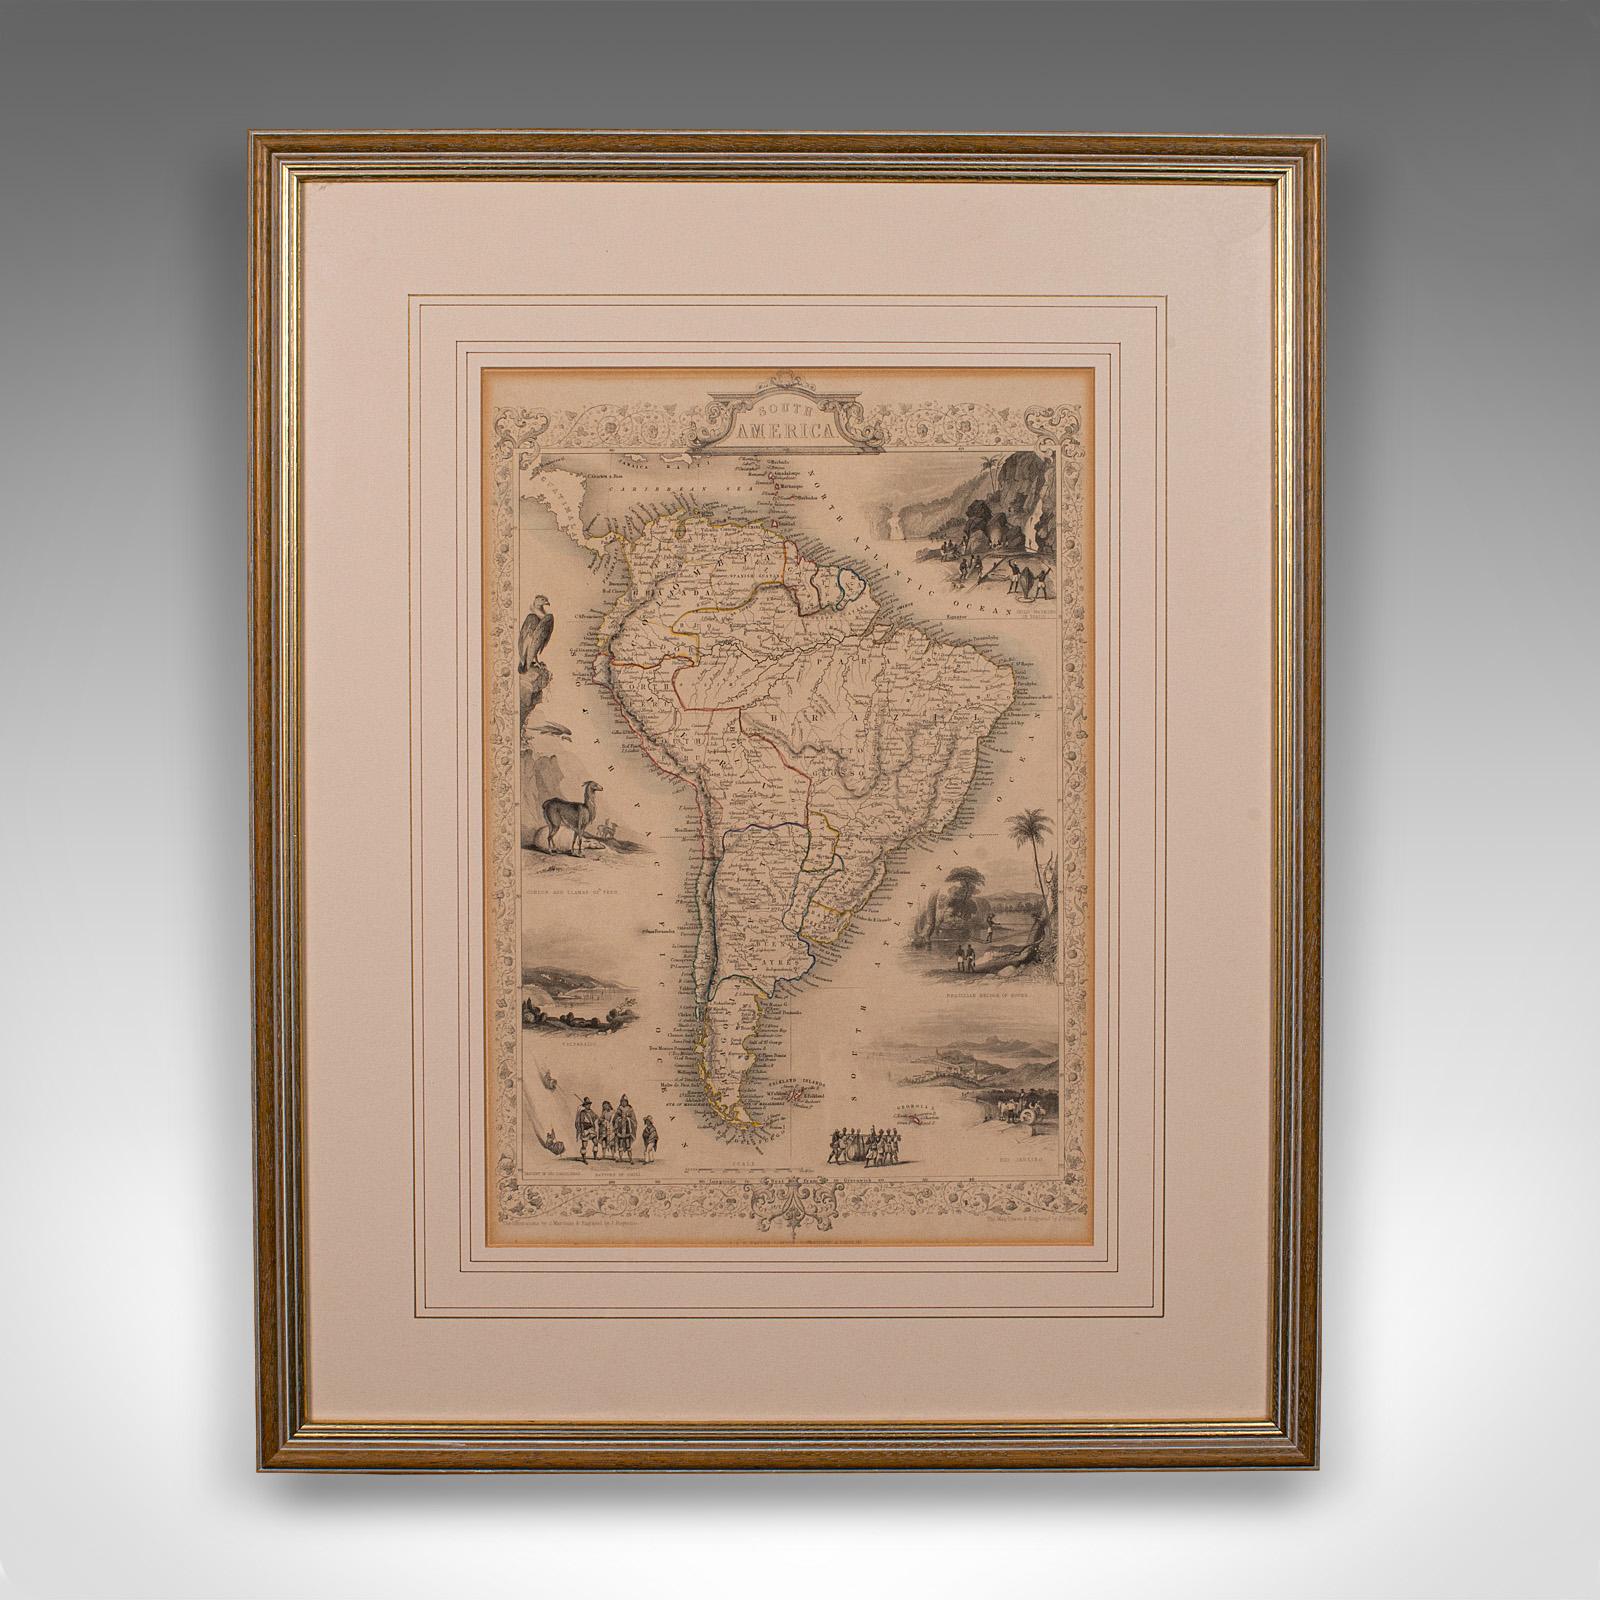 This is an antique lithography map of South America. An English, framed atlas engraving of cartographic interest by John Rapkin , dating to the early Victorian period and later, circa 1850.

John Rapkin was considered as one of the best map maker's